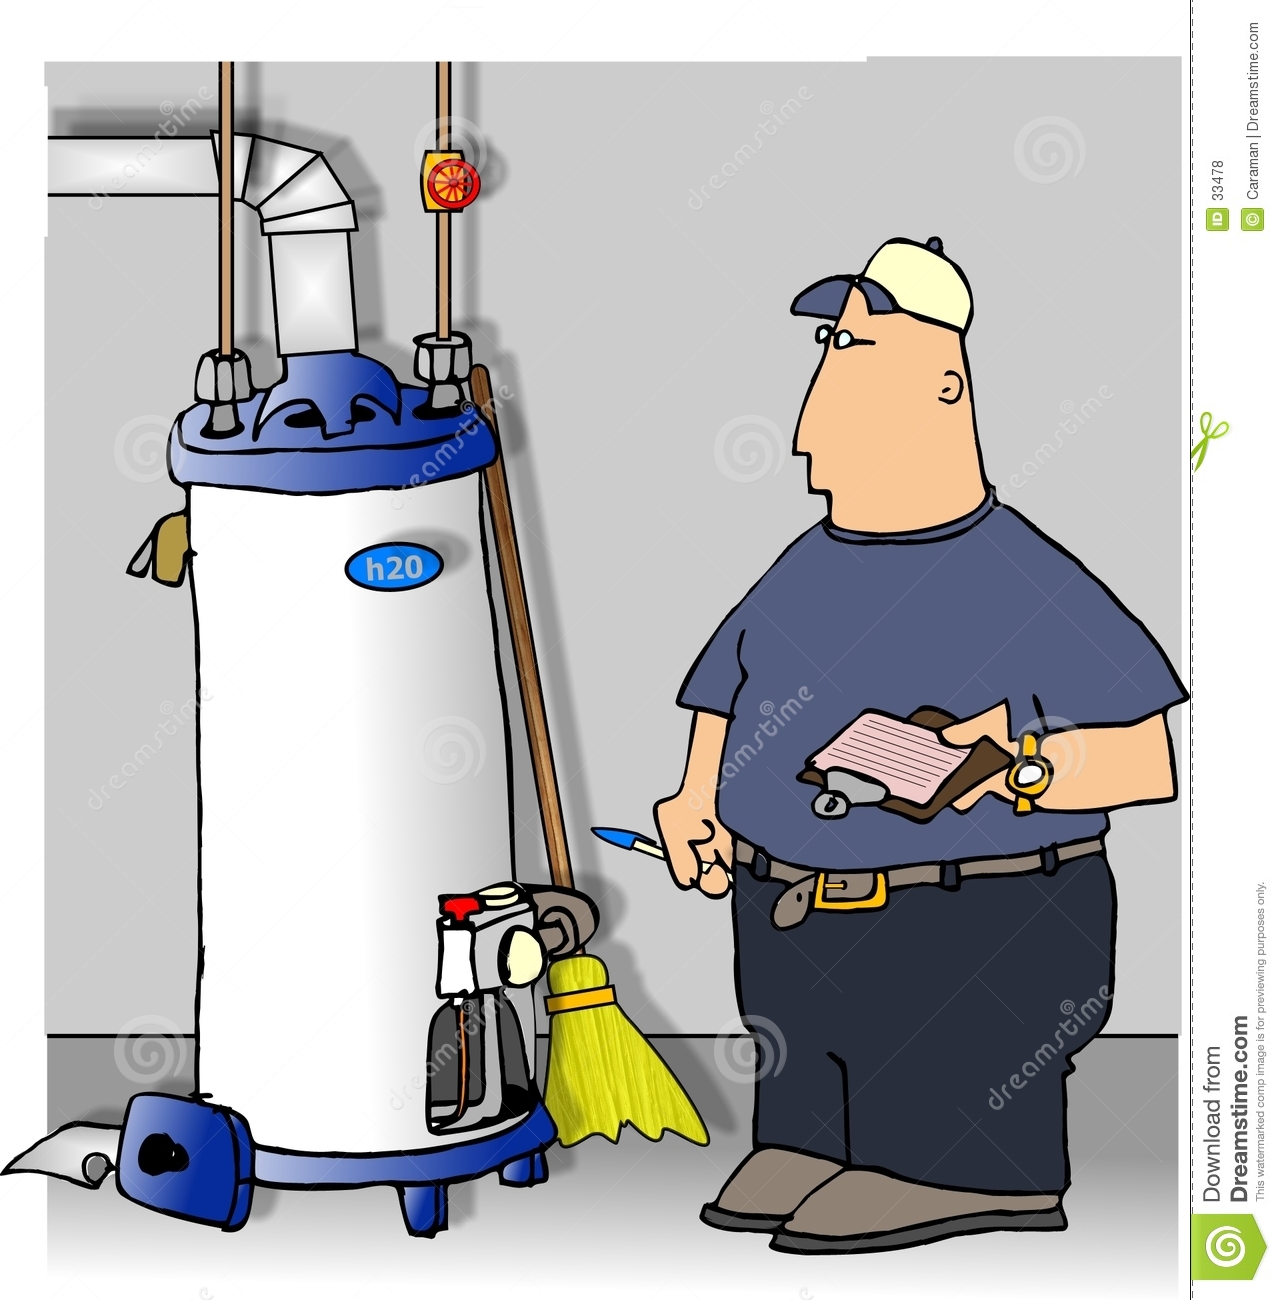 Illustration That I Created Depicts A Man Checking A Gas Water Heater